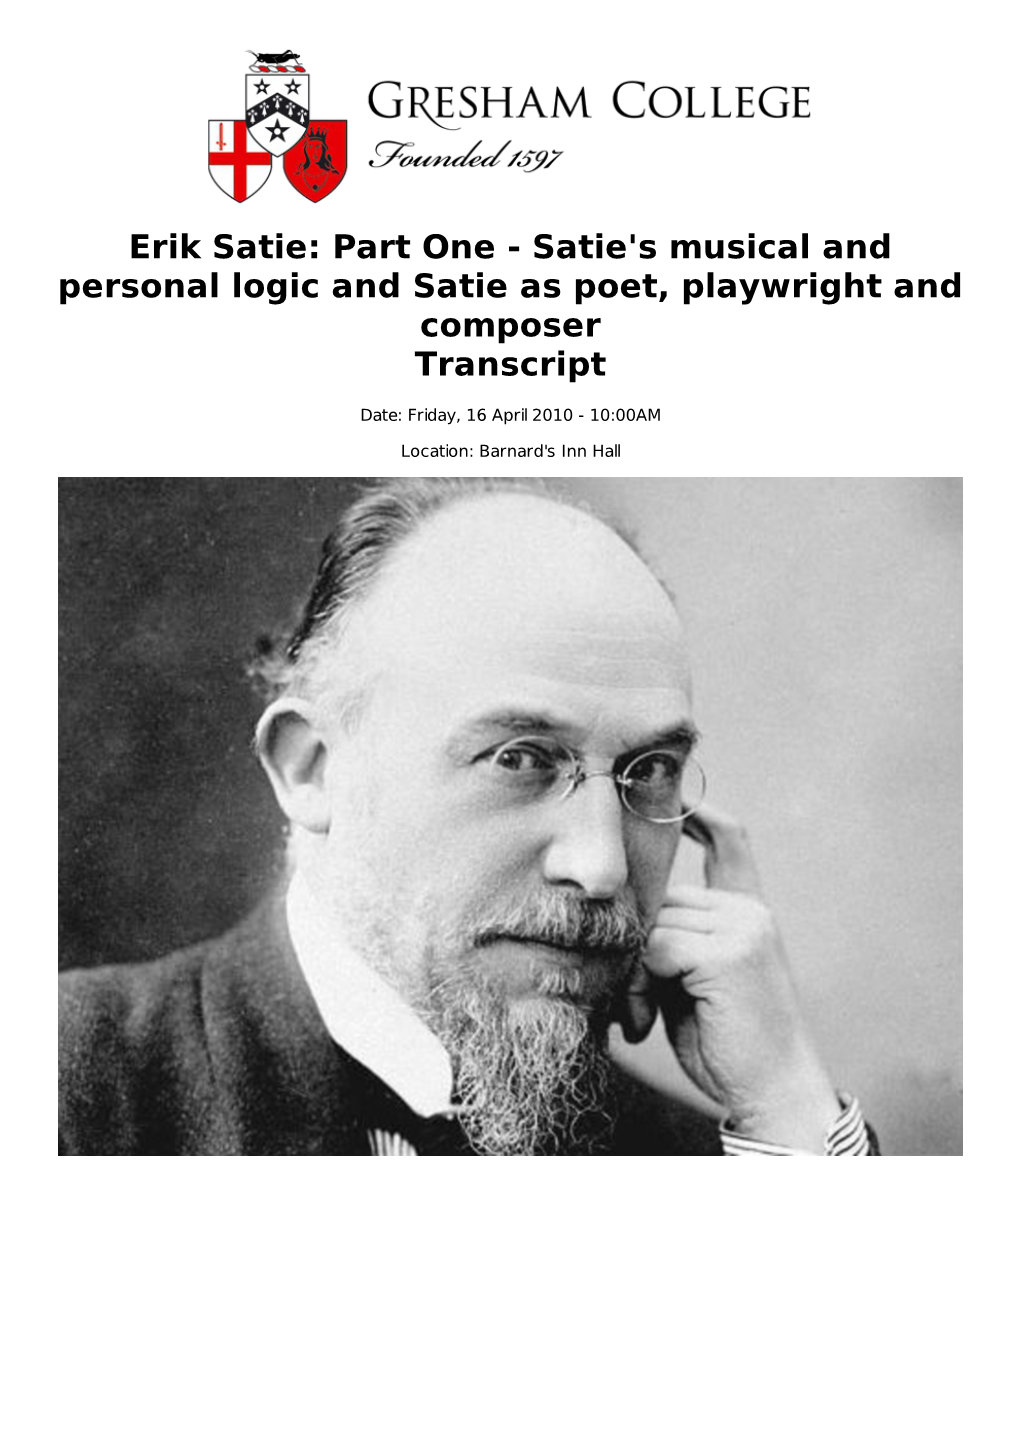 Erik Satie: Part One - Satie's Musical and Personal Logic and Satie As Poet, Playwright and Composer Transcript